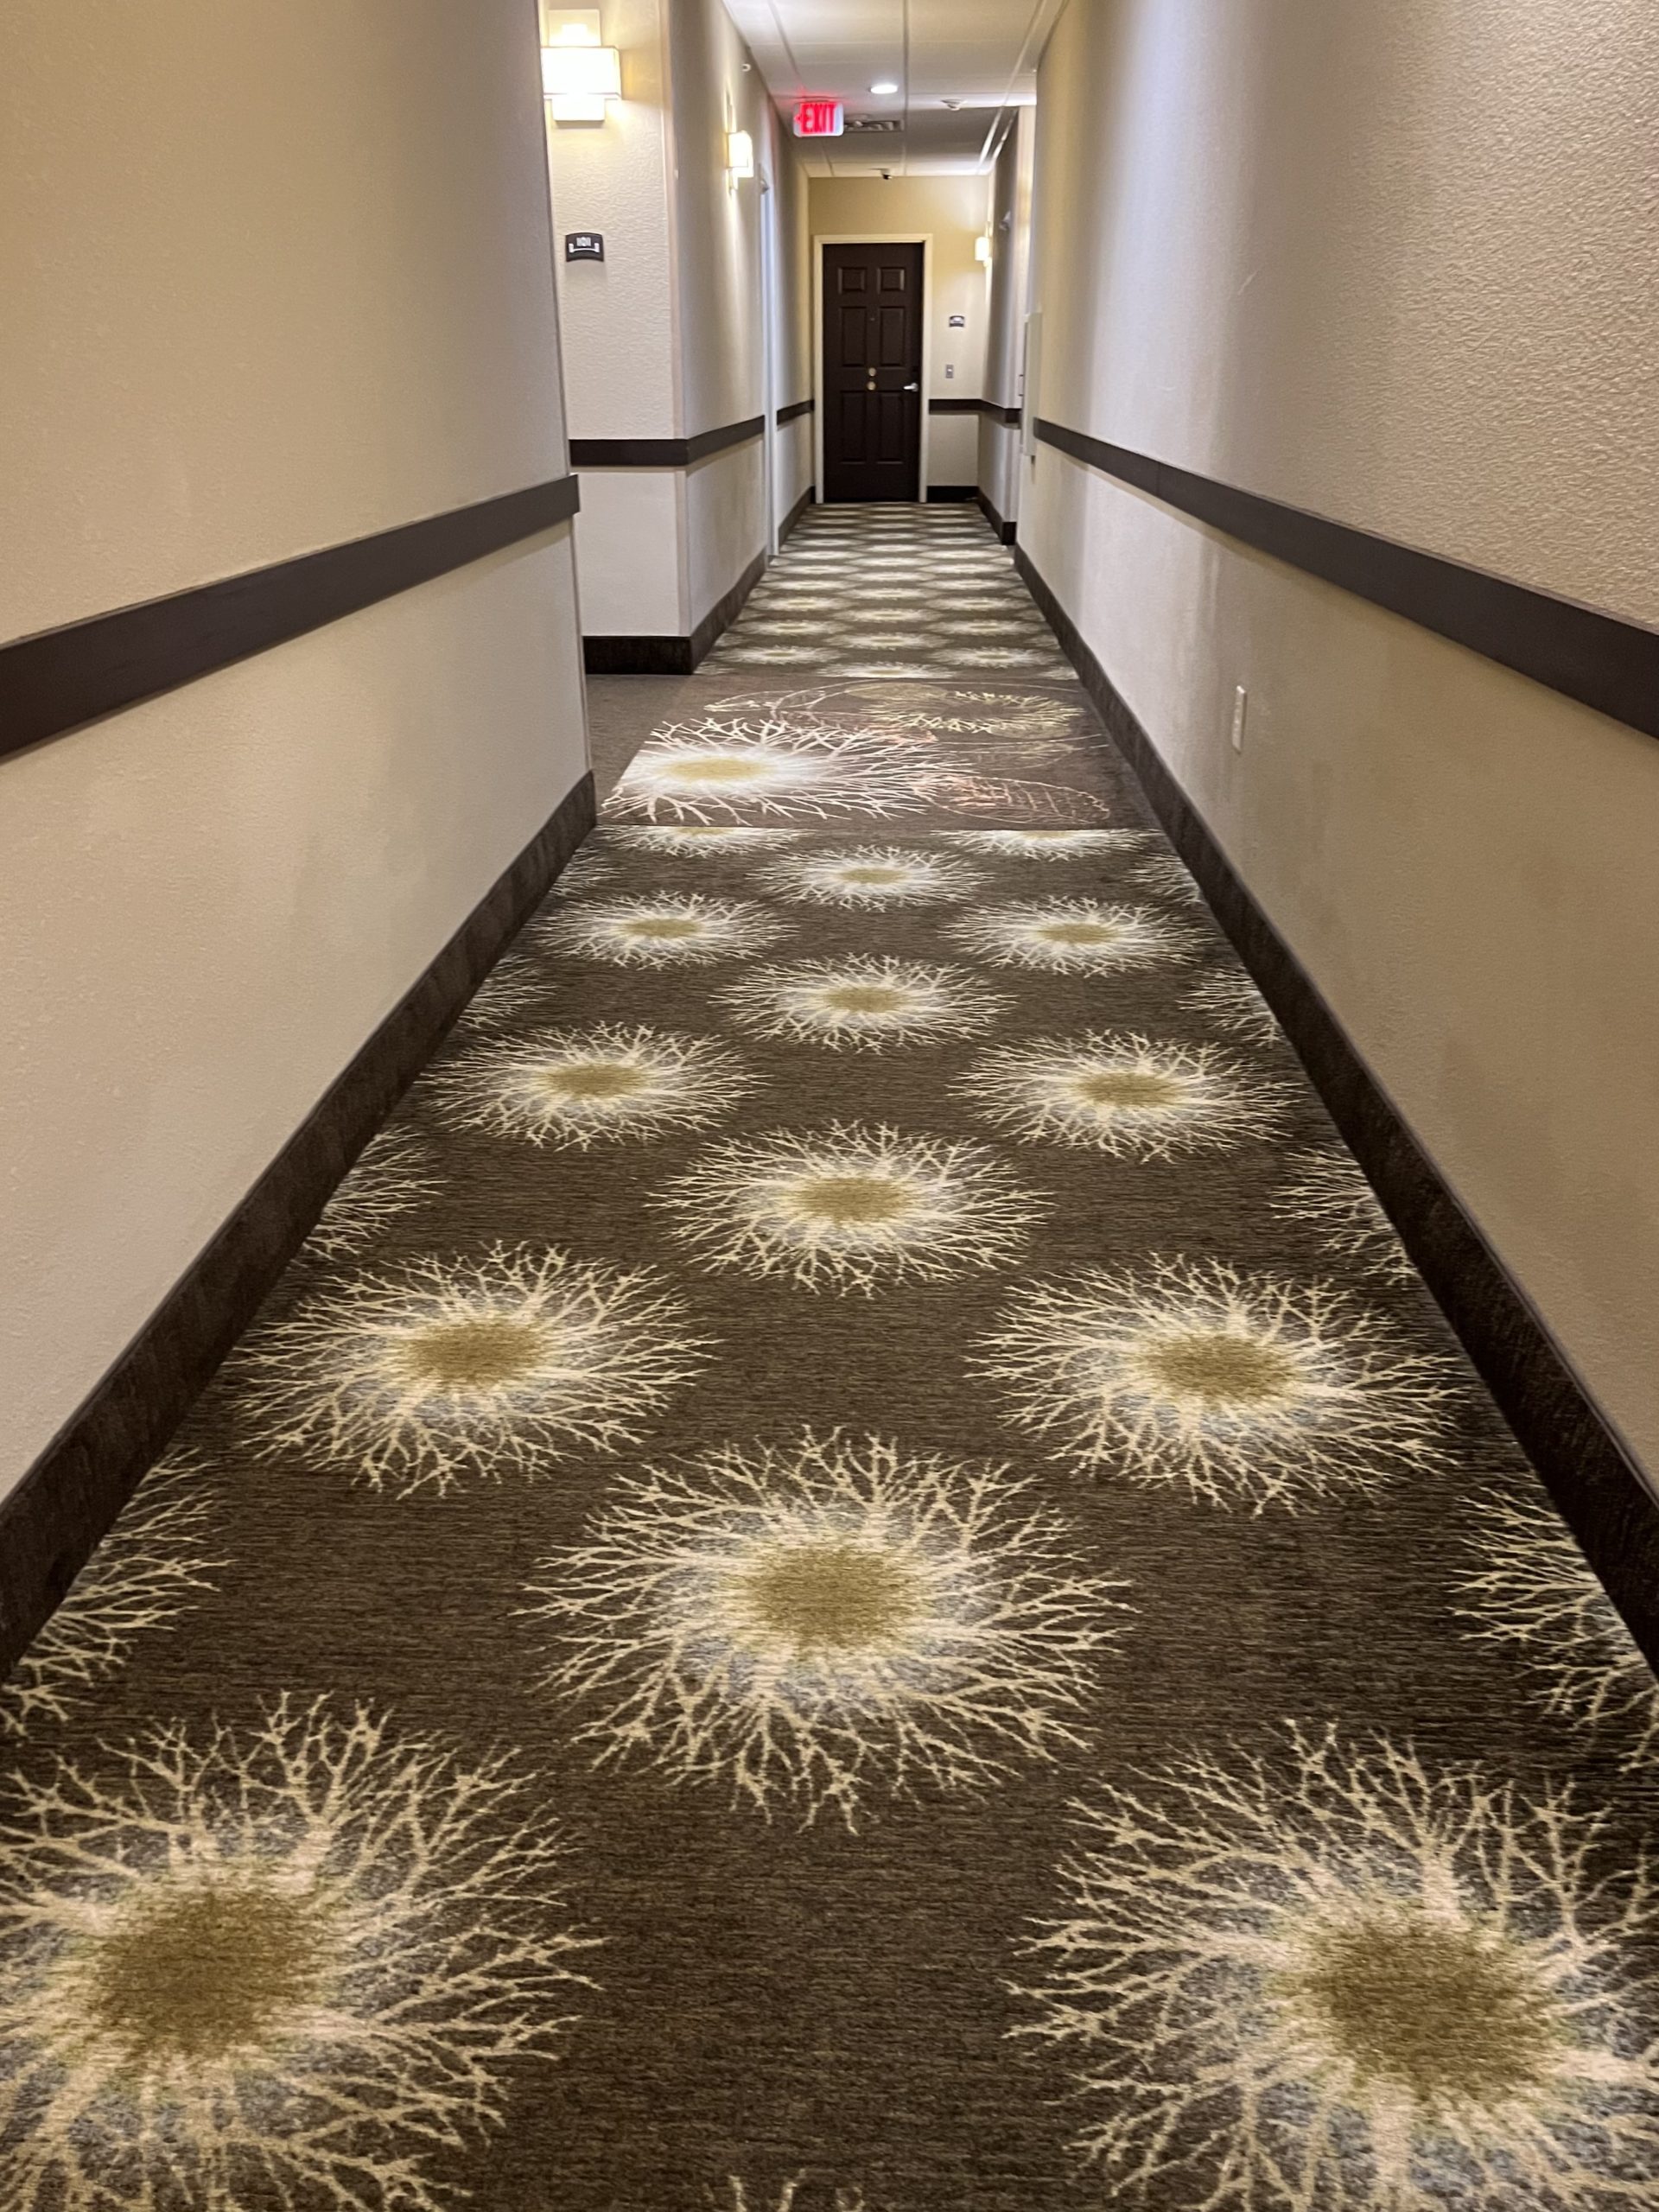 a long hallway with a carpeted floor